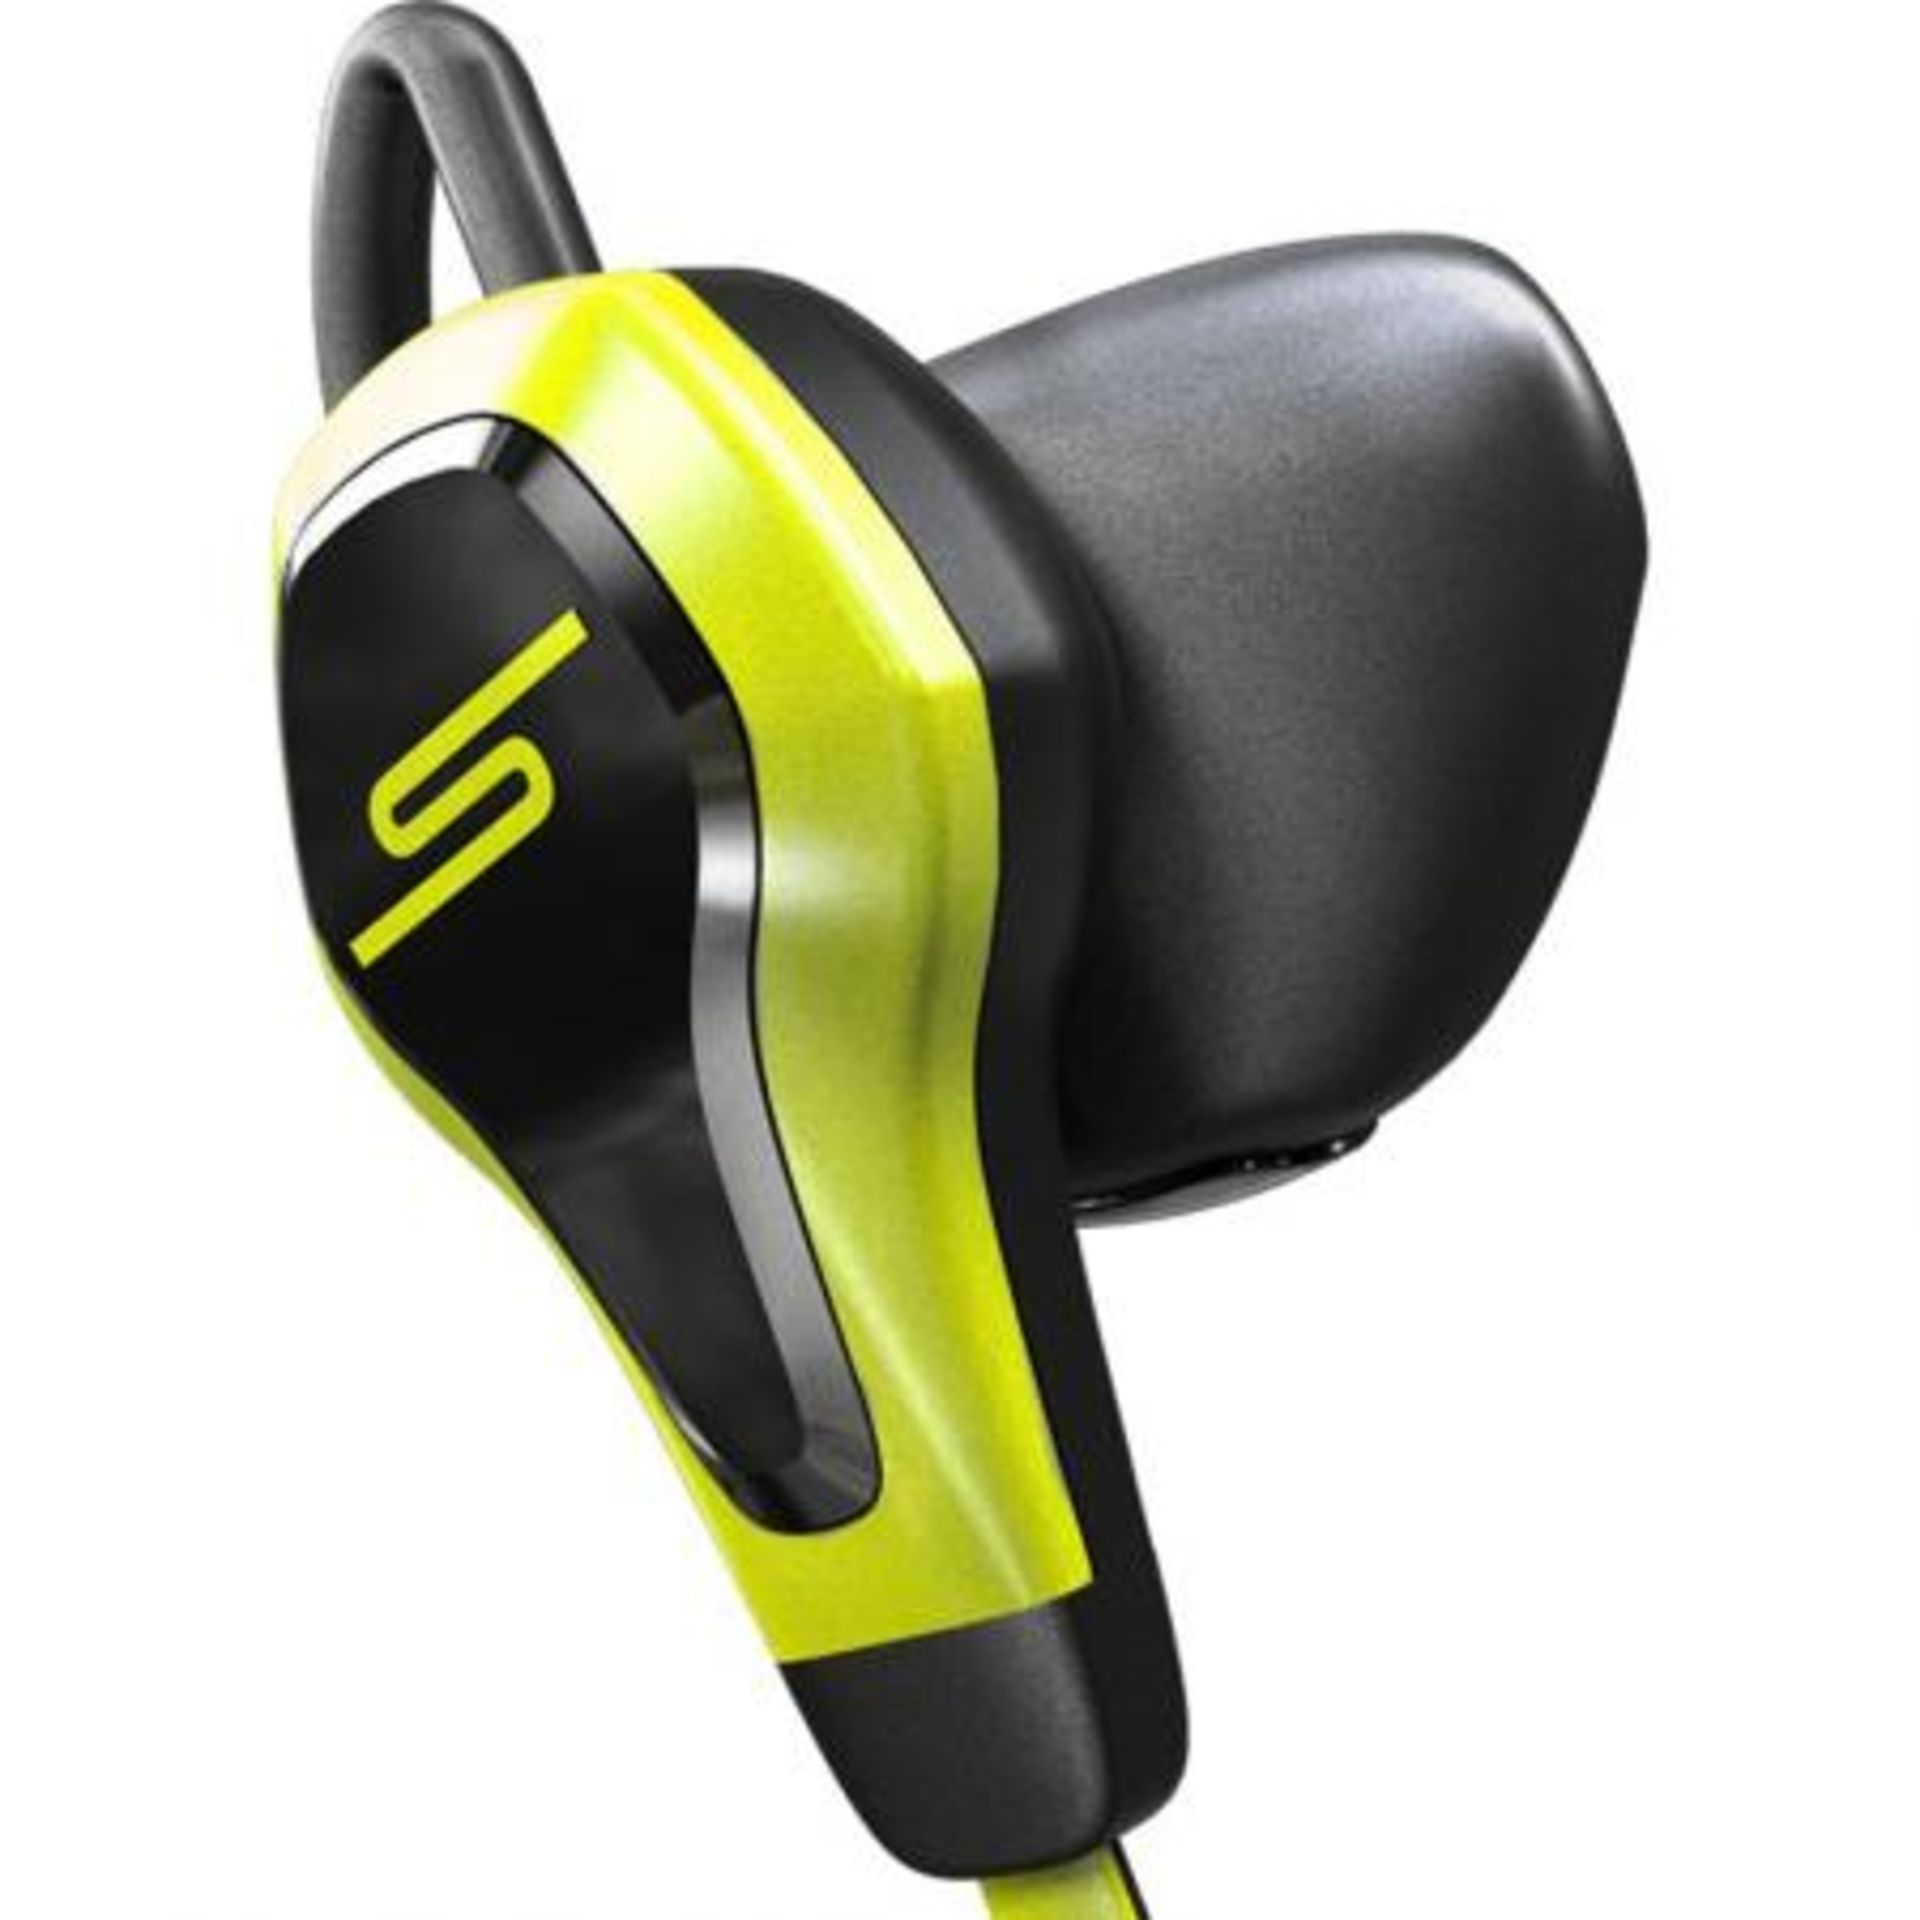 V *TRADE QTY* Brand New SMS Audio BioSport Earphones - Heart Rate Monitor Measures Changes In - Image 4 of 5